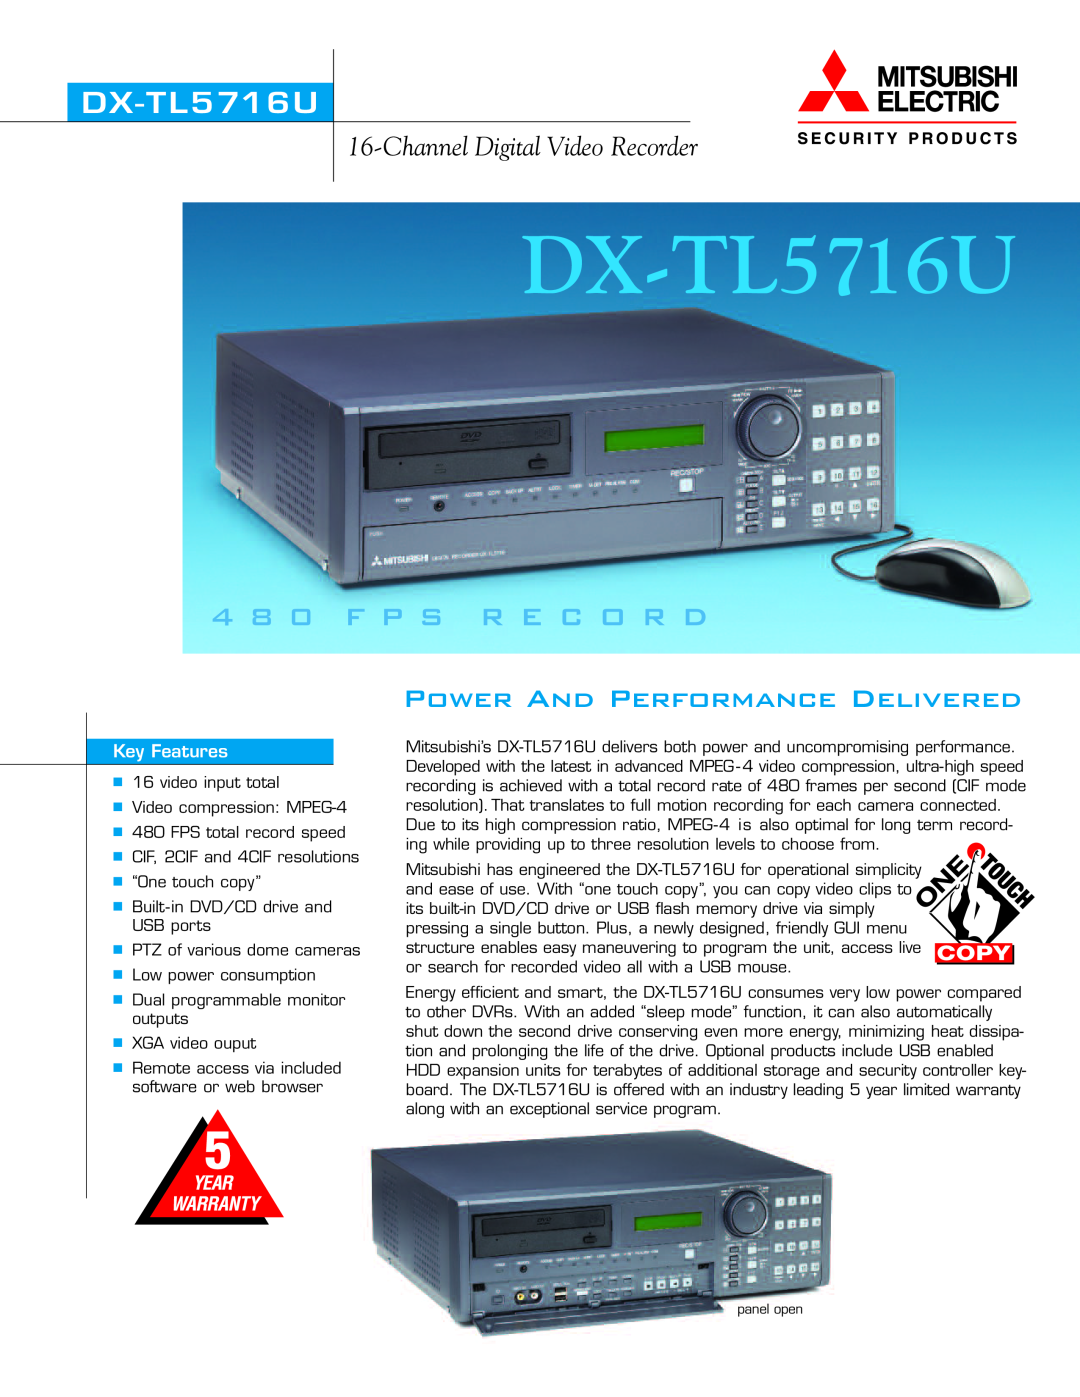 Mitsumi electronic DX-TL5716U warranty DX-T L5 716U, 4 8 0 FP S RECORD, Power And Performance Delivered, Key Features 